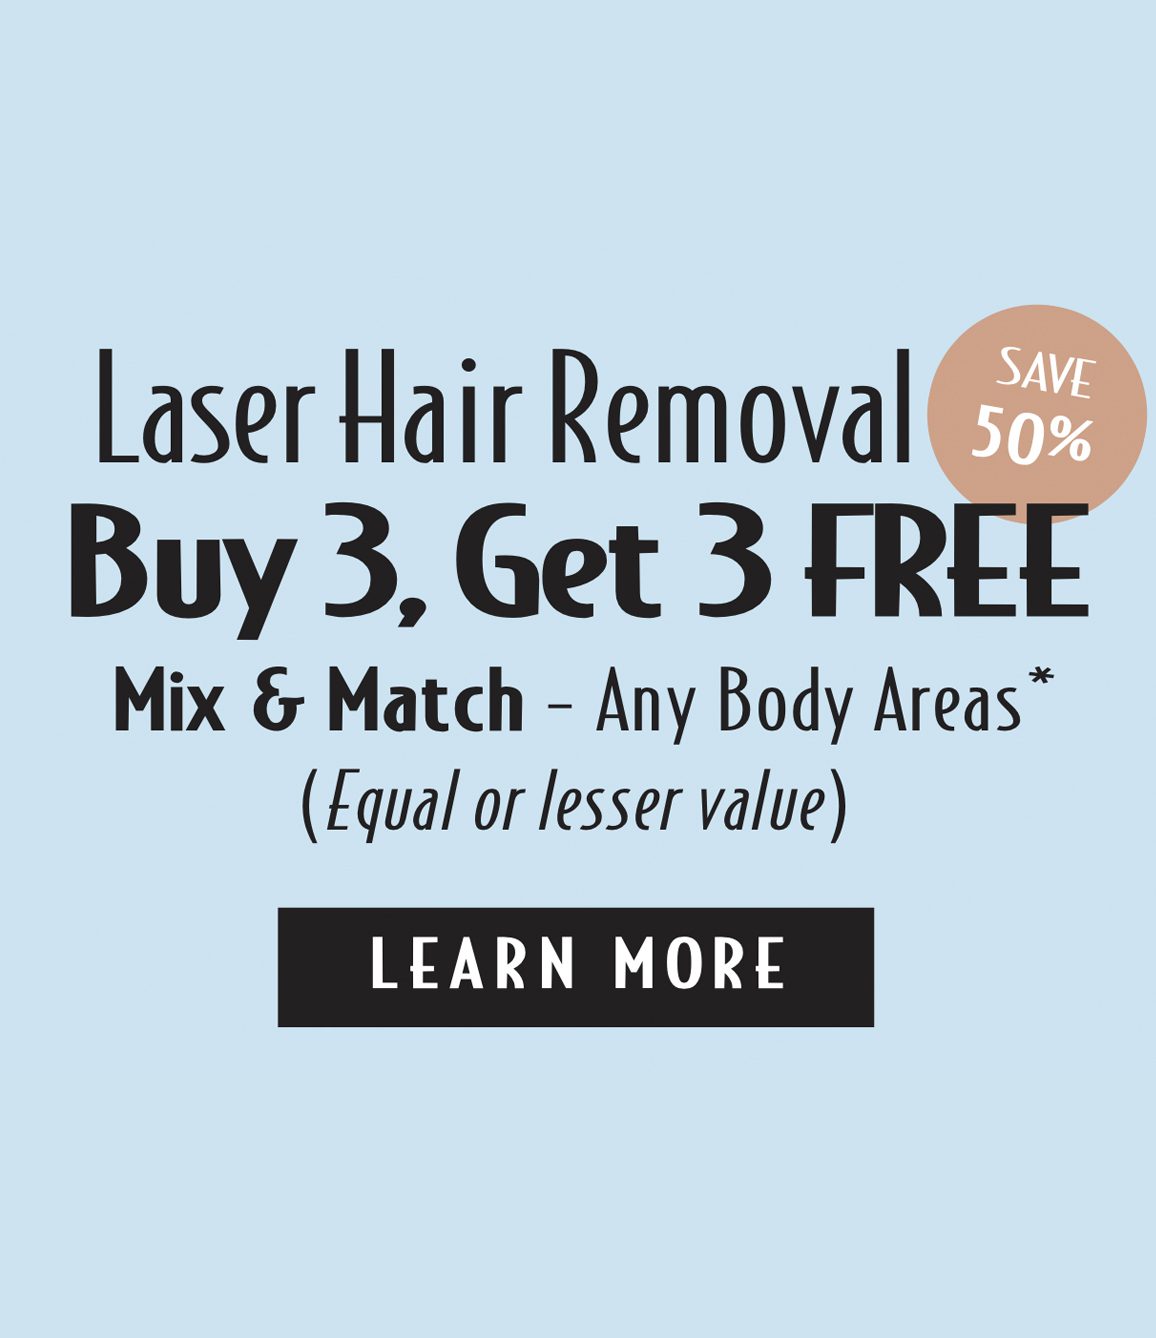 Laser Hair Removal - Buy 3 and Get 3 FREE